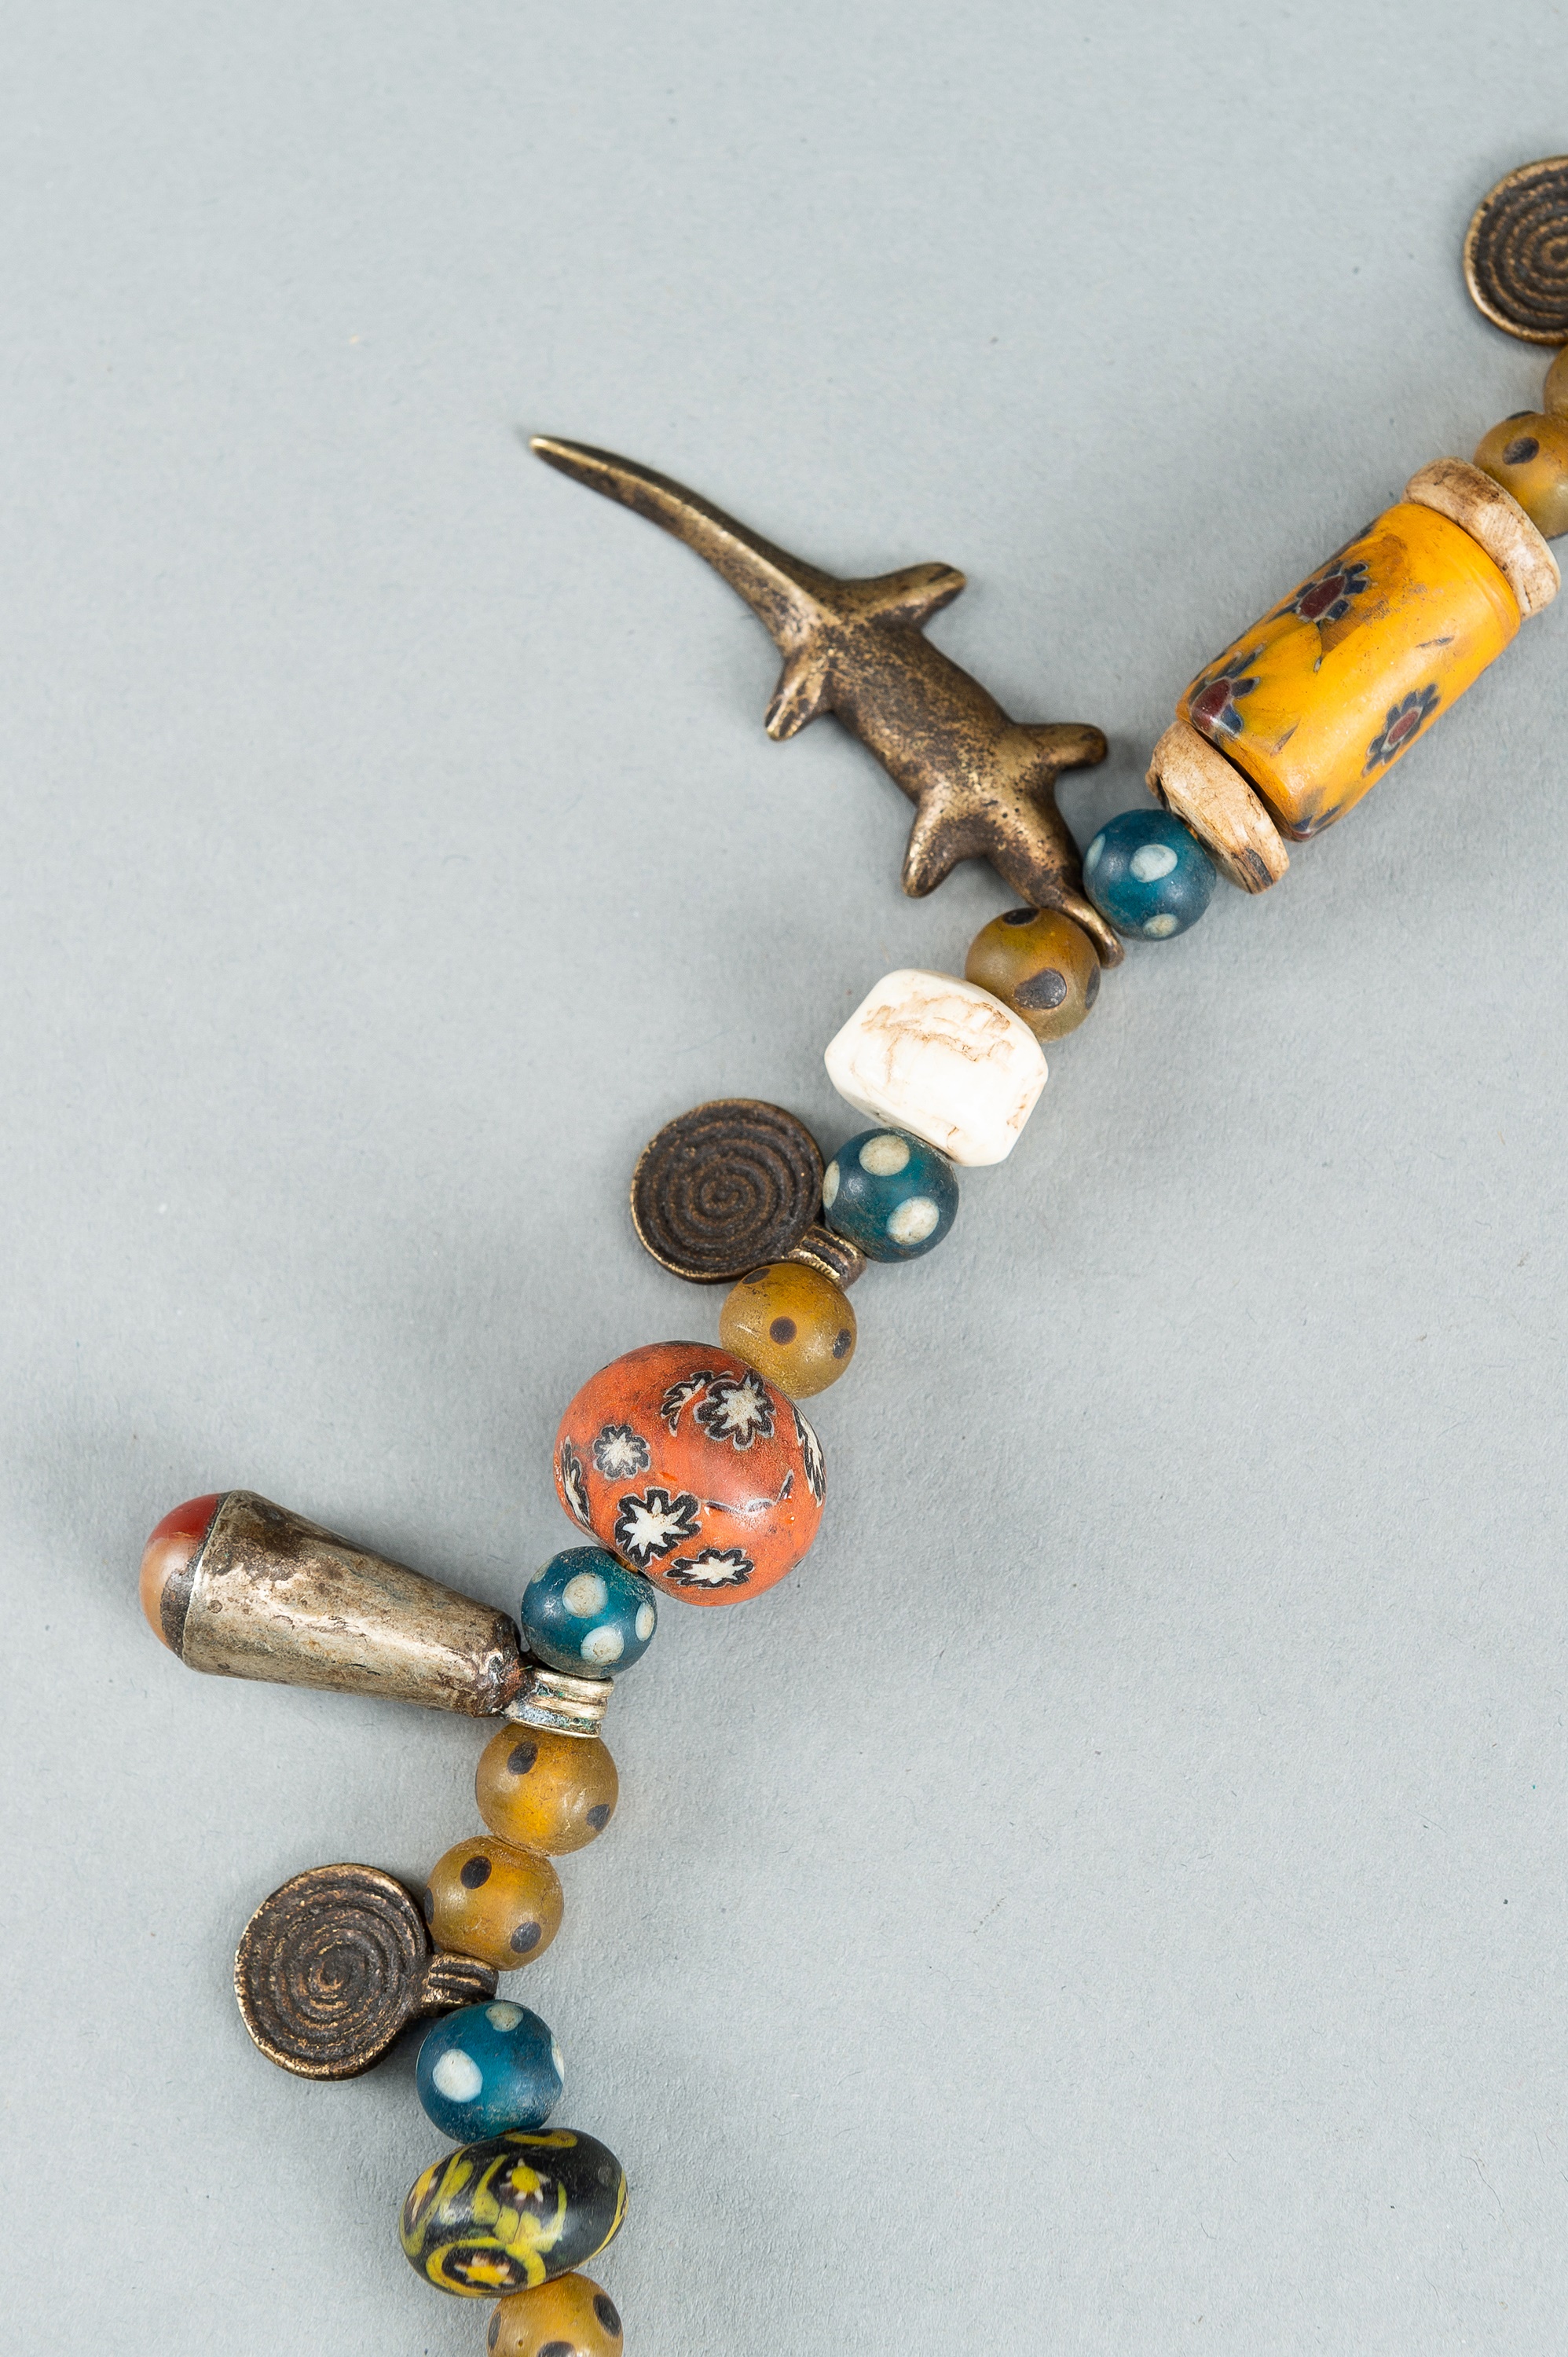 A NAGALAND MULTI-COLORED GLASS, BRASS AND SHELL NECKLACE, c. 1900s - Image 11 of 17